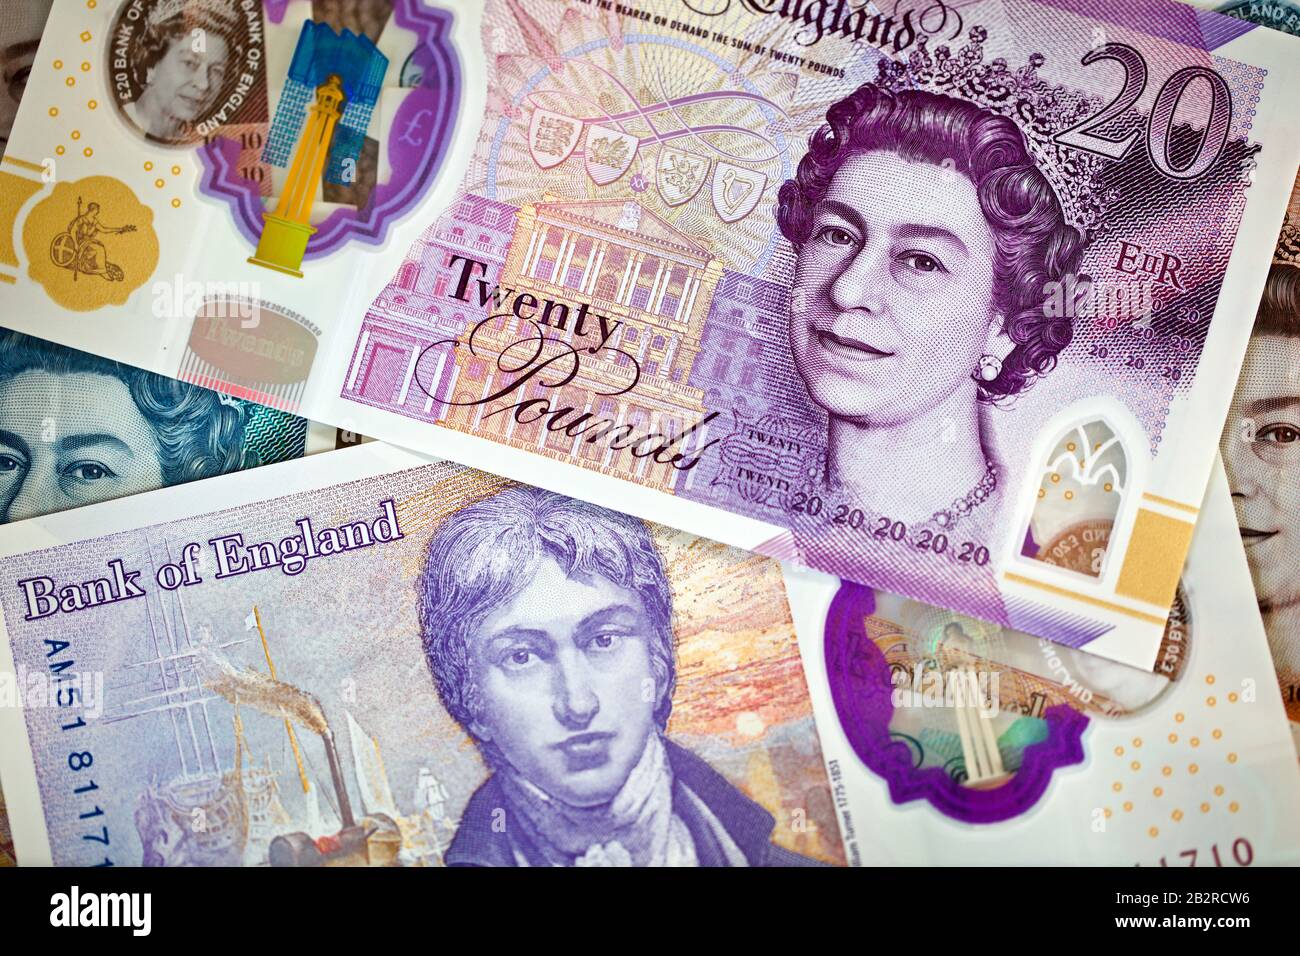 The new 2020 polymer £20 pound note from the Bank of England featuring artist JMW Turner Stock Photo